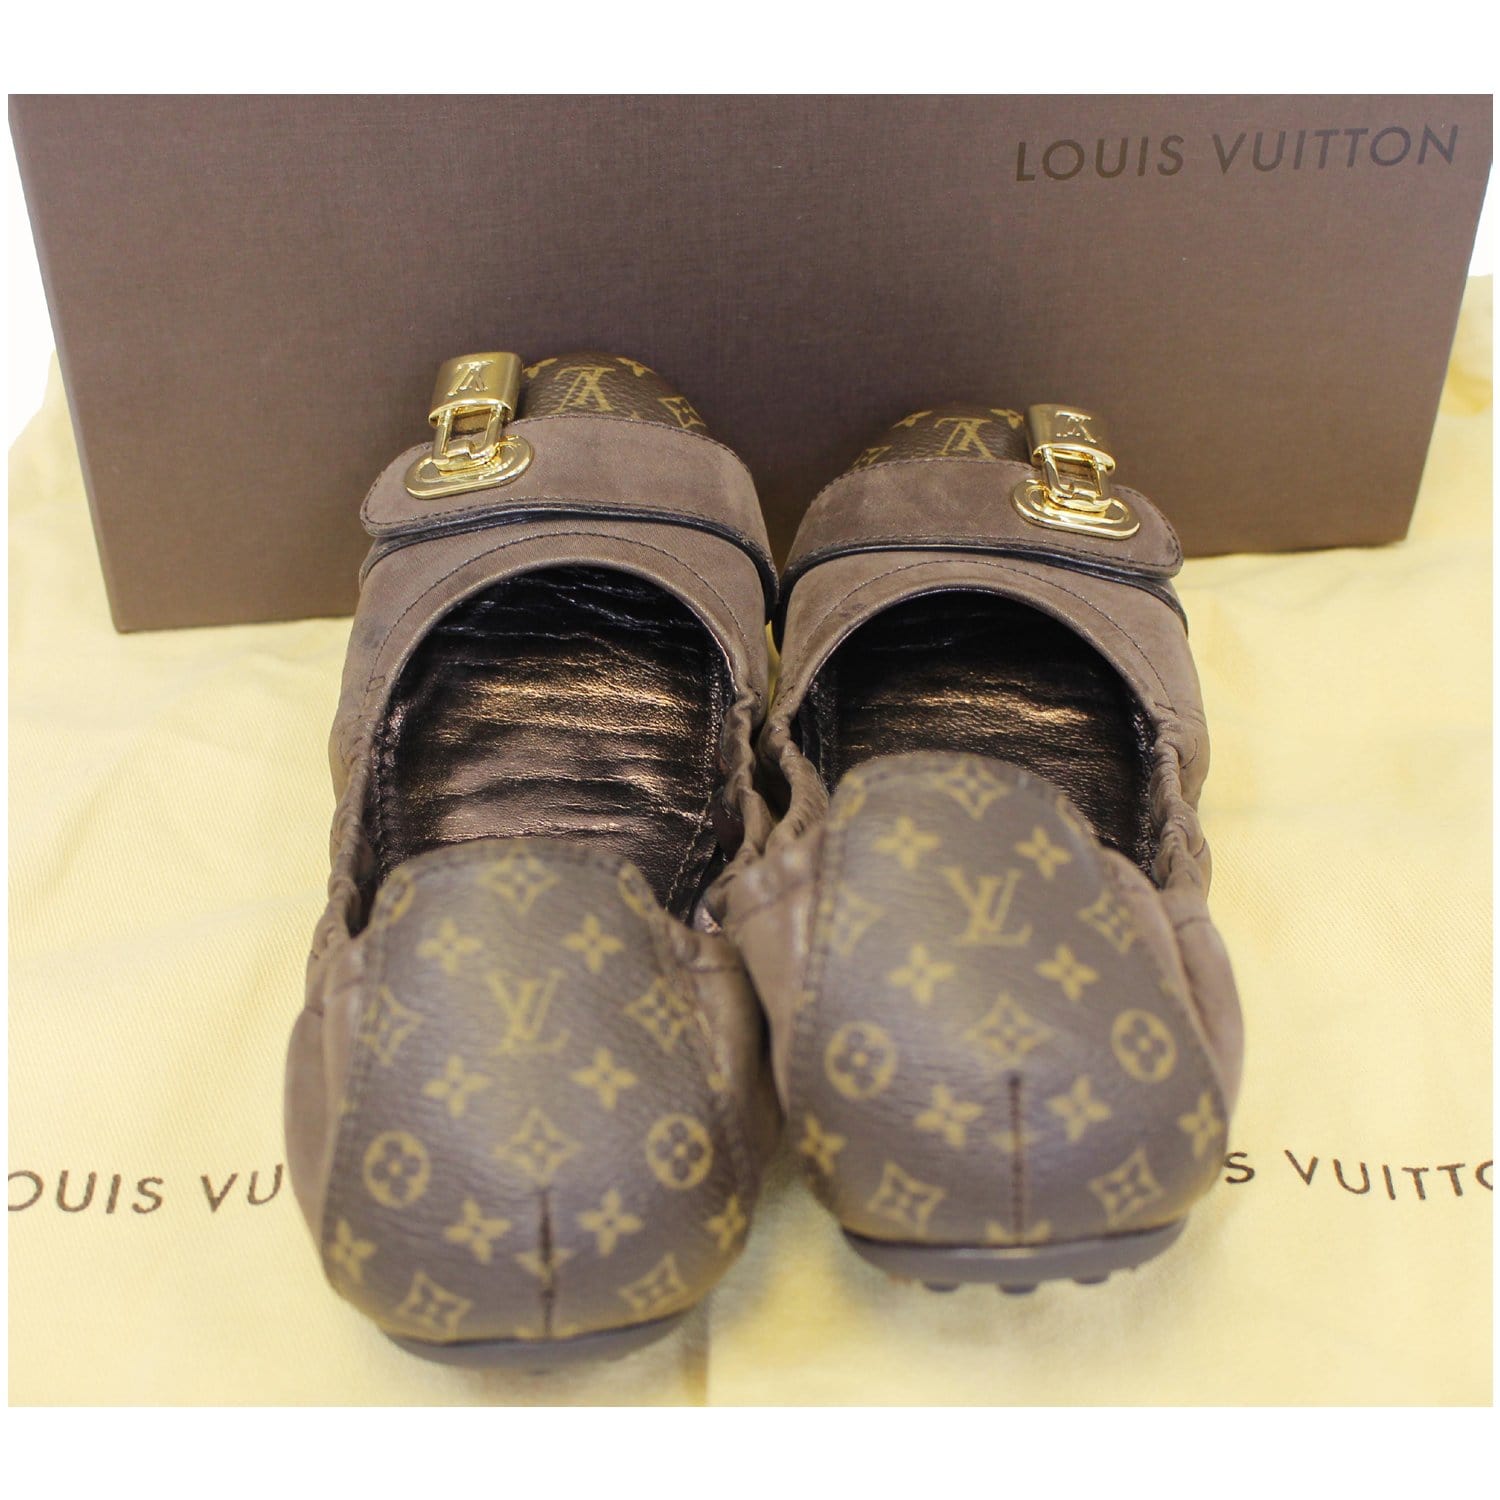 Louis Vuitton ballerina flats size 10 US- With box and dust bag